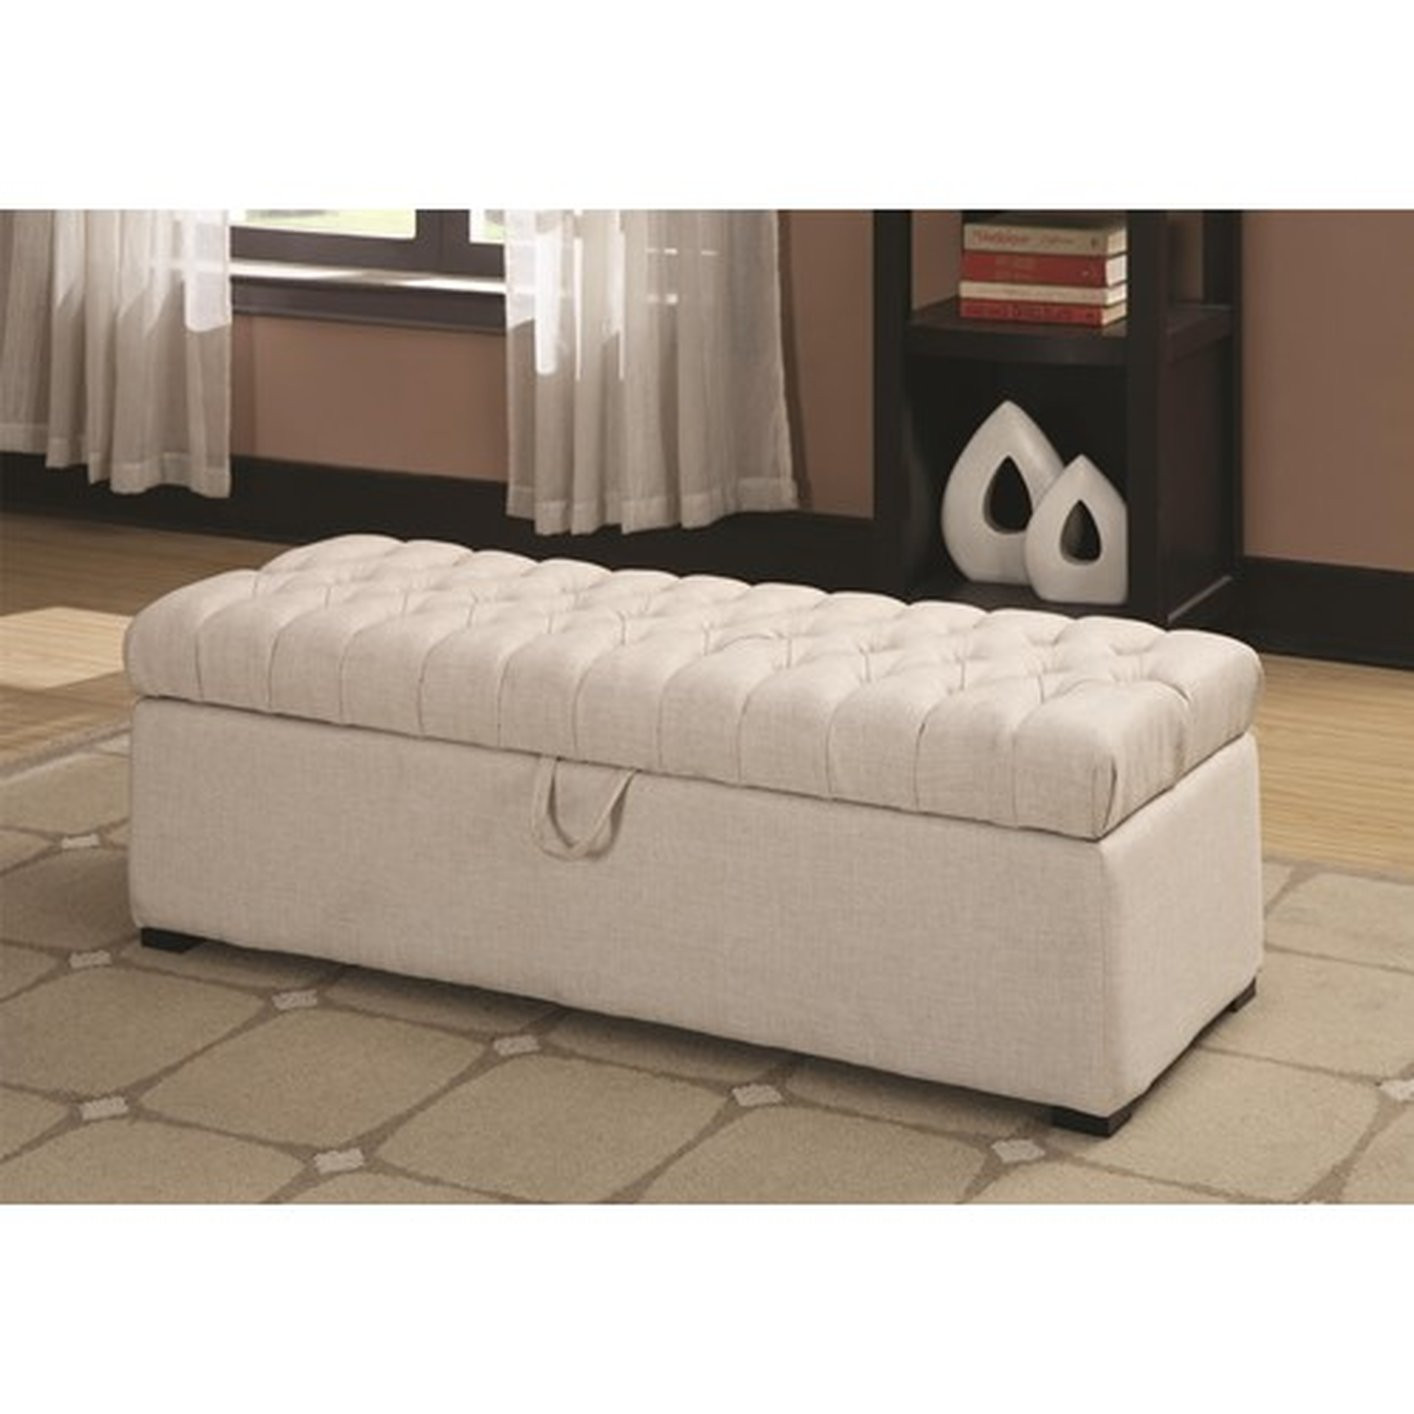 Fabric Bench With Storage
 White Fabric Storage Bench Steal A Sofa Furniture Outlet